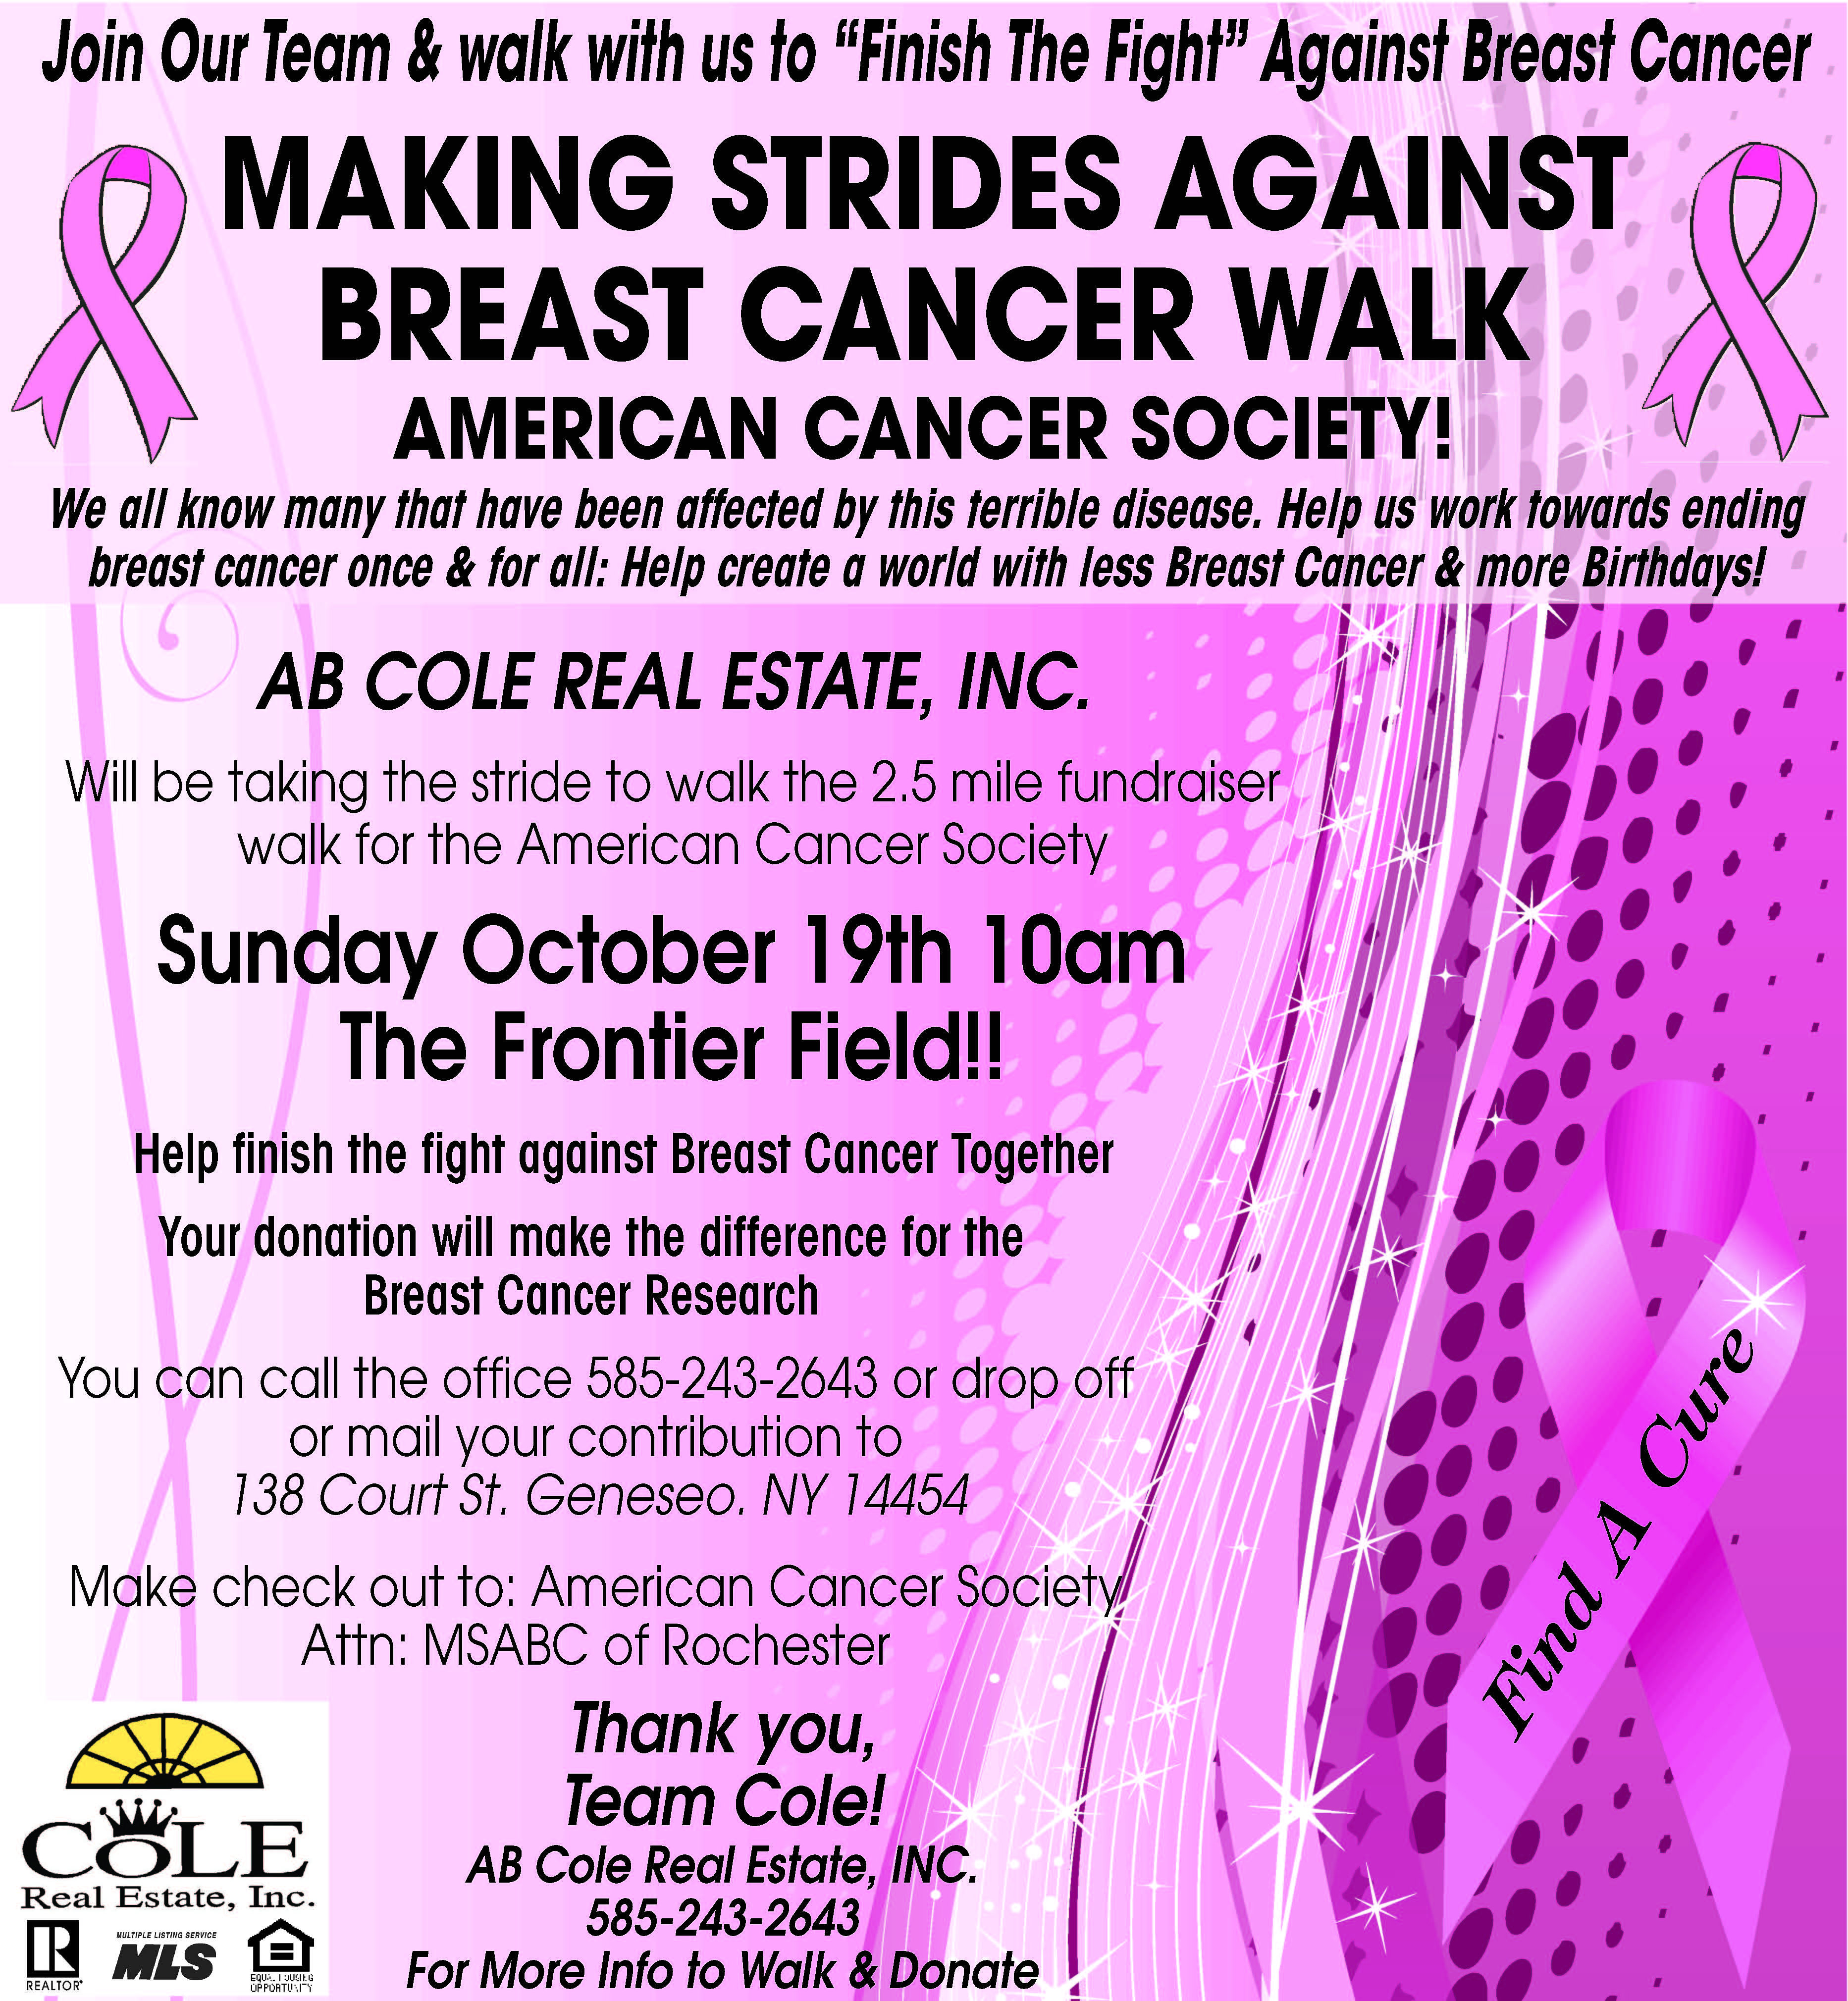 Come Join Us On October 19, 2014 to fight Breast Cancer